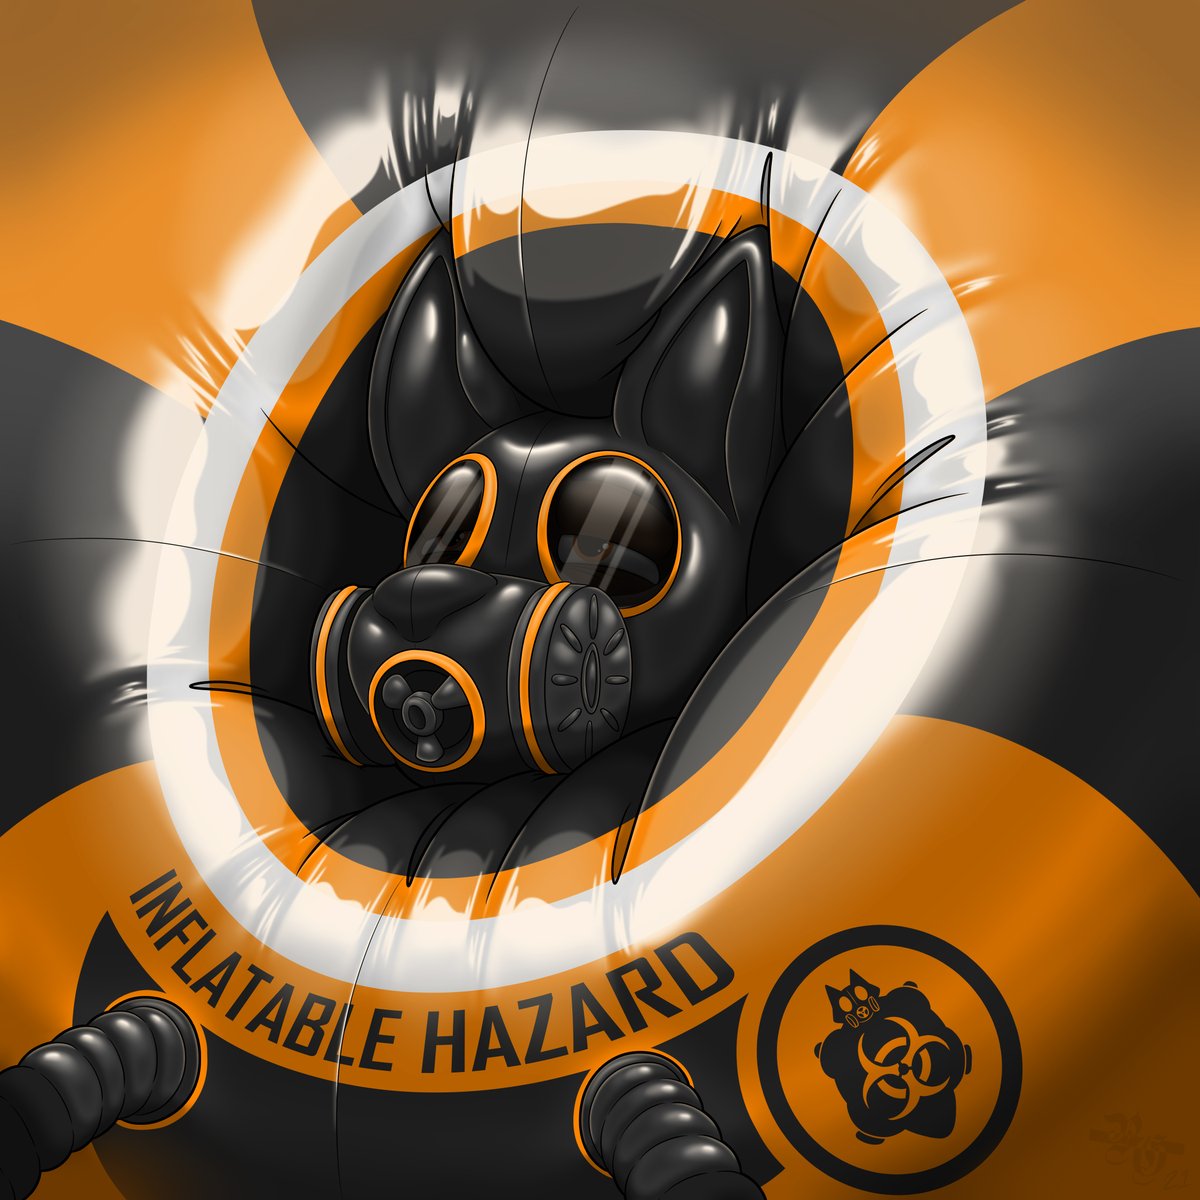 EXPYCH_InflatableHazard_21_B2

Feat_ @xenoncat20 @SqueakyRyder @Mozee and @Zappy_Kalladach 

Round 3 coming soon...